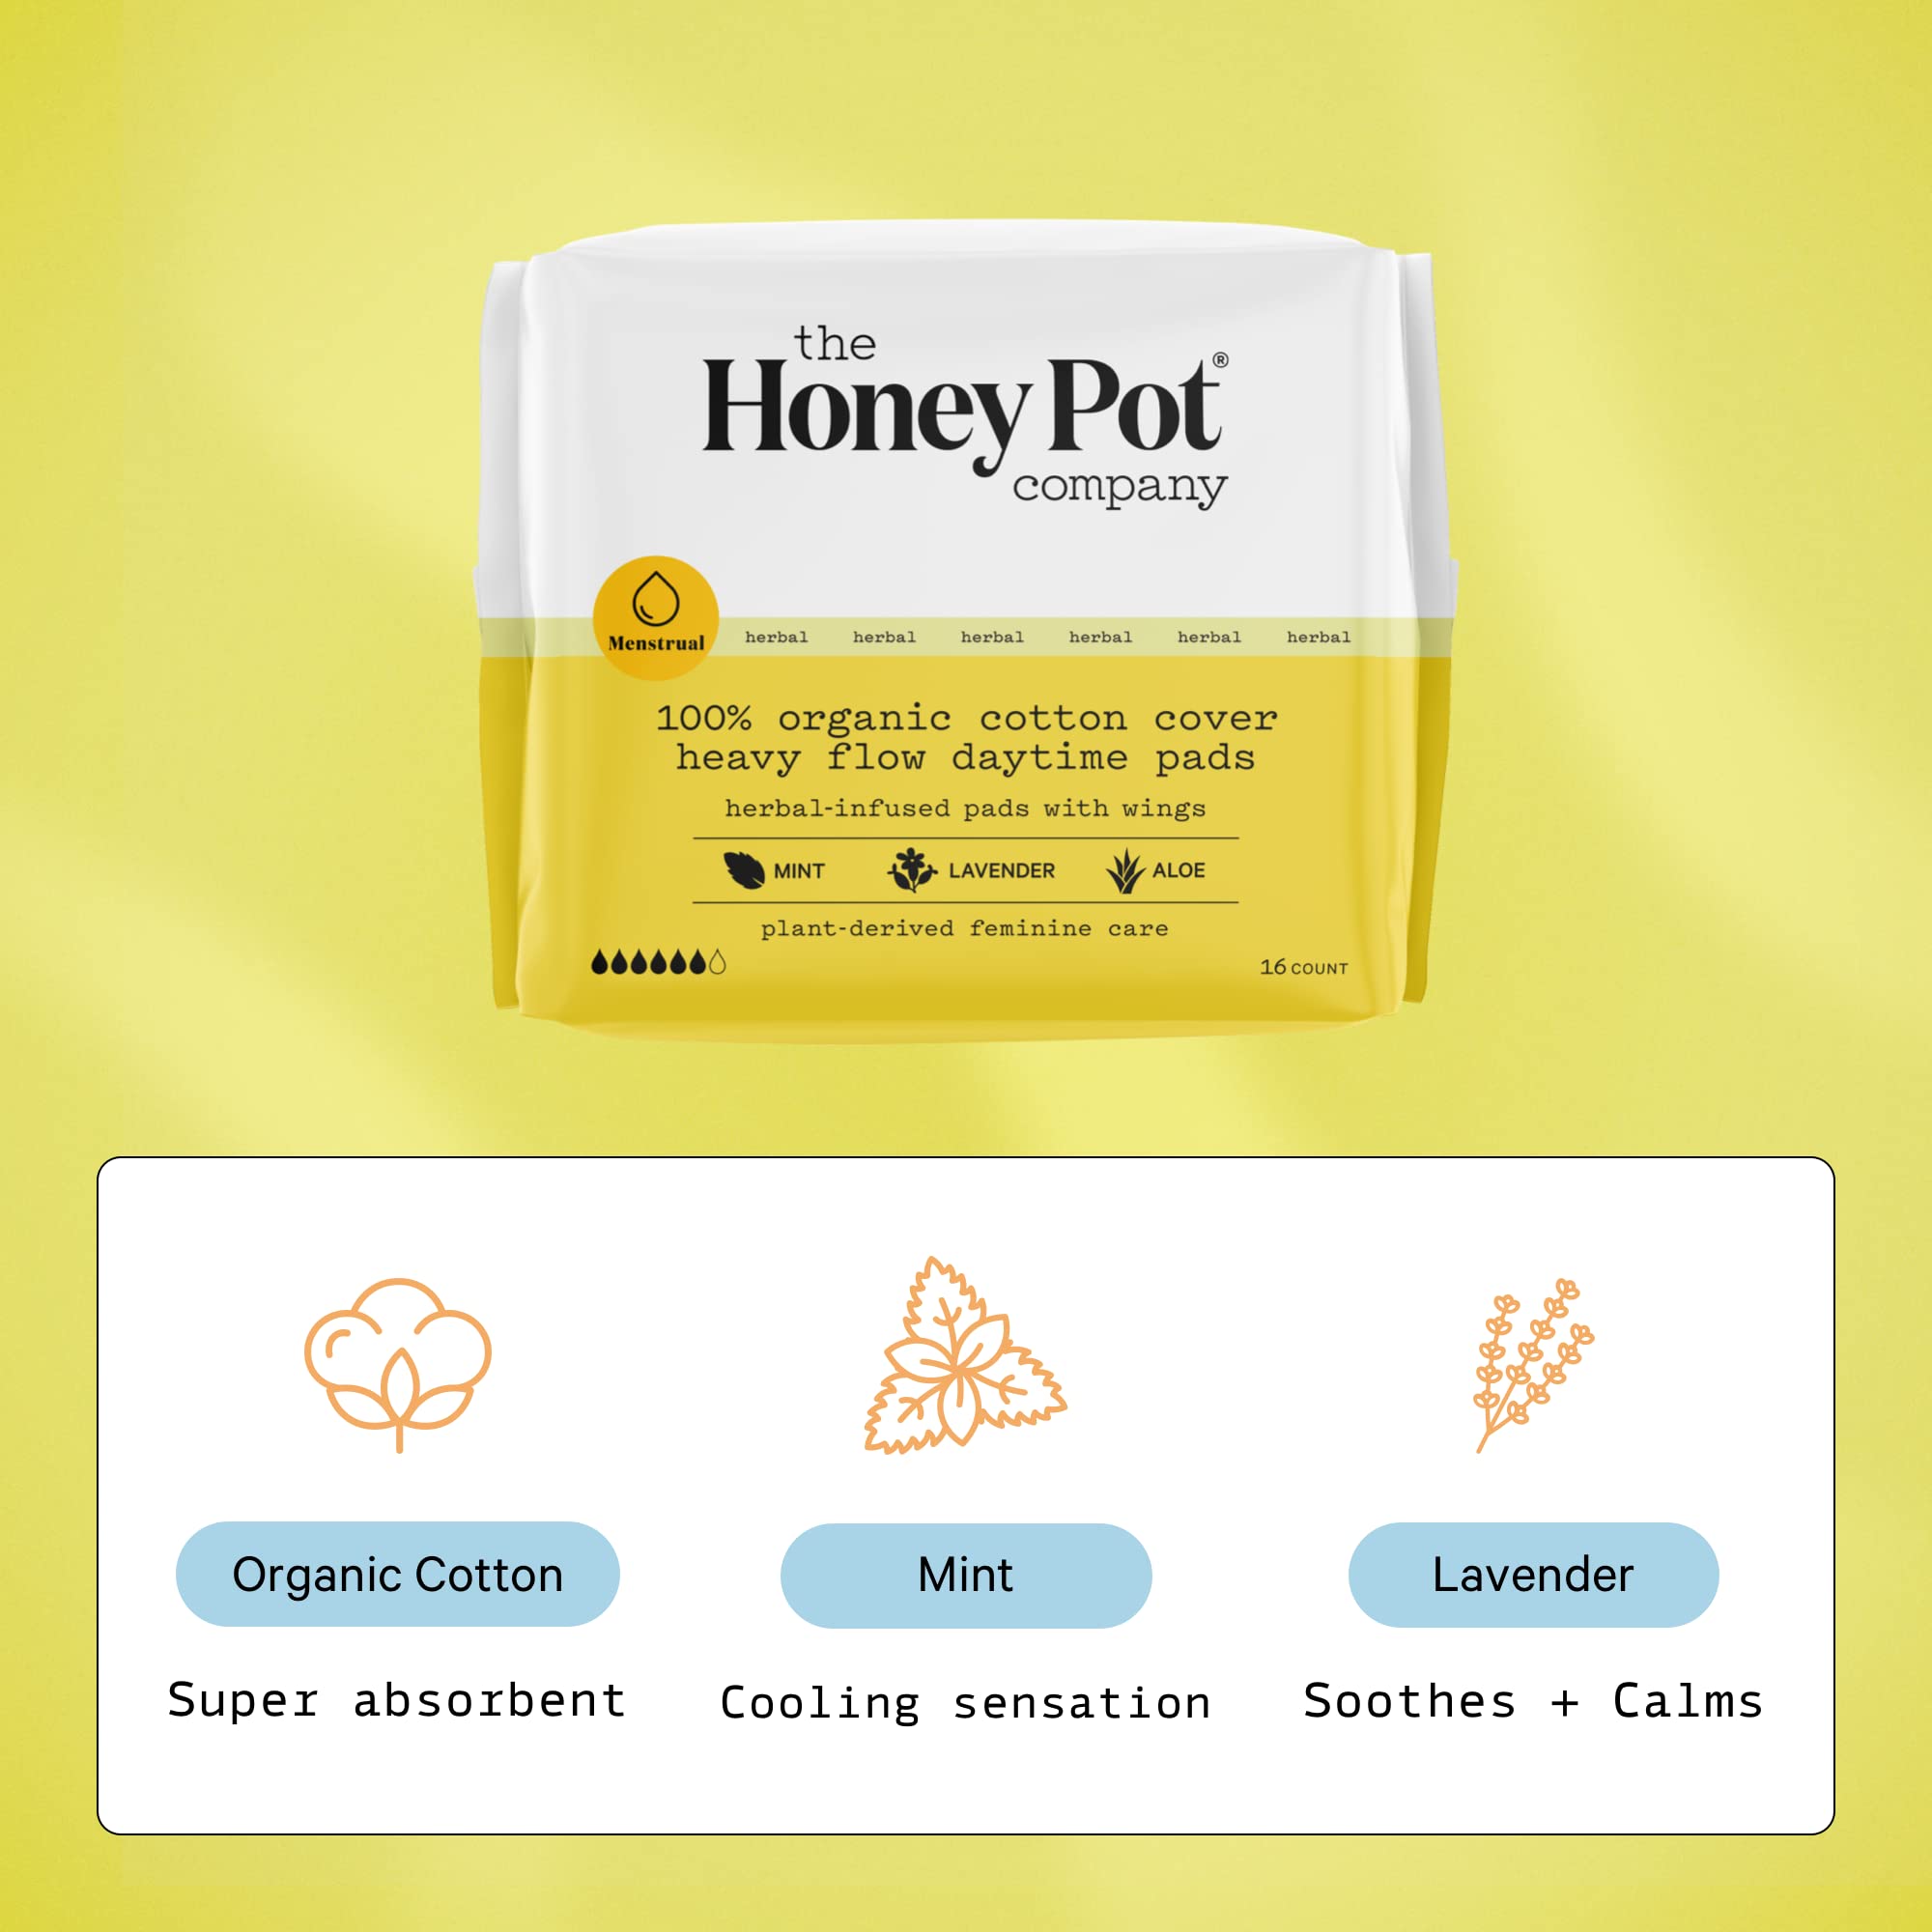 The Honey Pot Company - Daytime Heavy Flow Pads with Wings - Organic Pads for Women - Herbal Infused w/Essential Oils for Cooling Effect, Cotton Cover, & Ultra-Absorbent Pulp Core -16ct